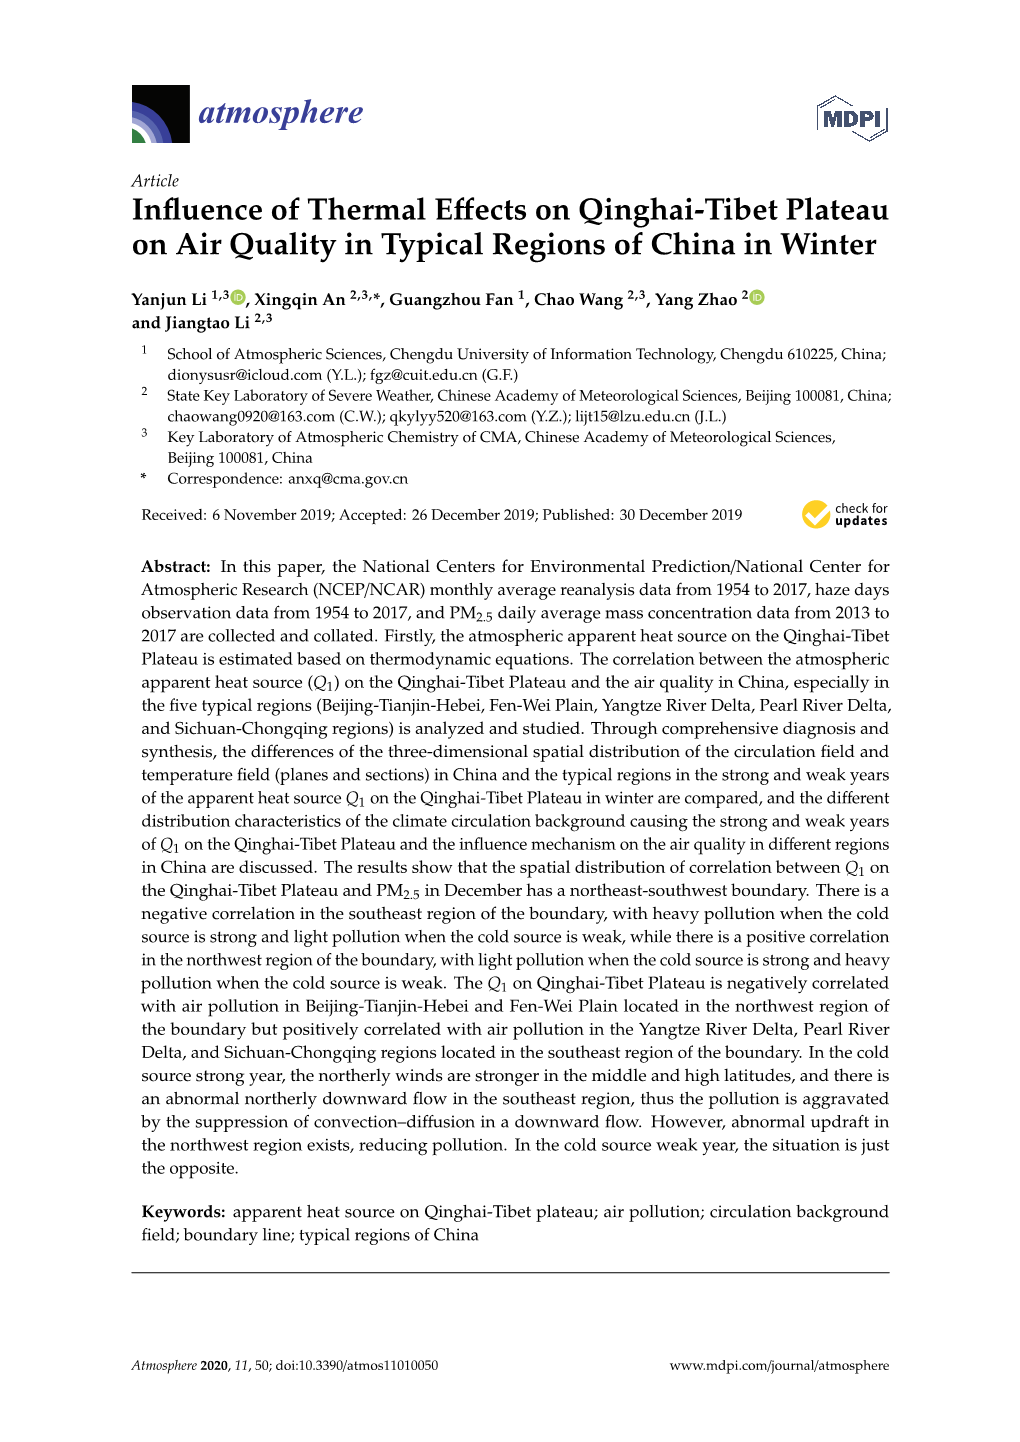 Influence of Thermal Effects on Qinghai-Tibet Plateau on Air Quality